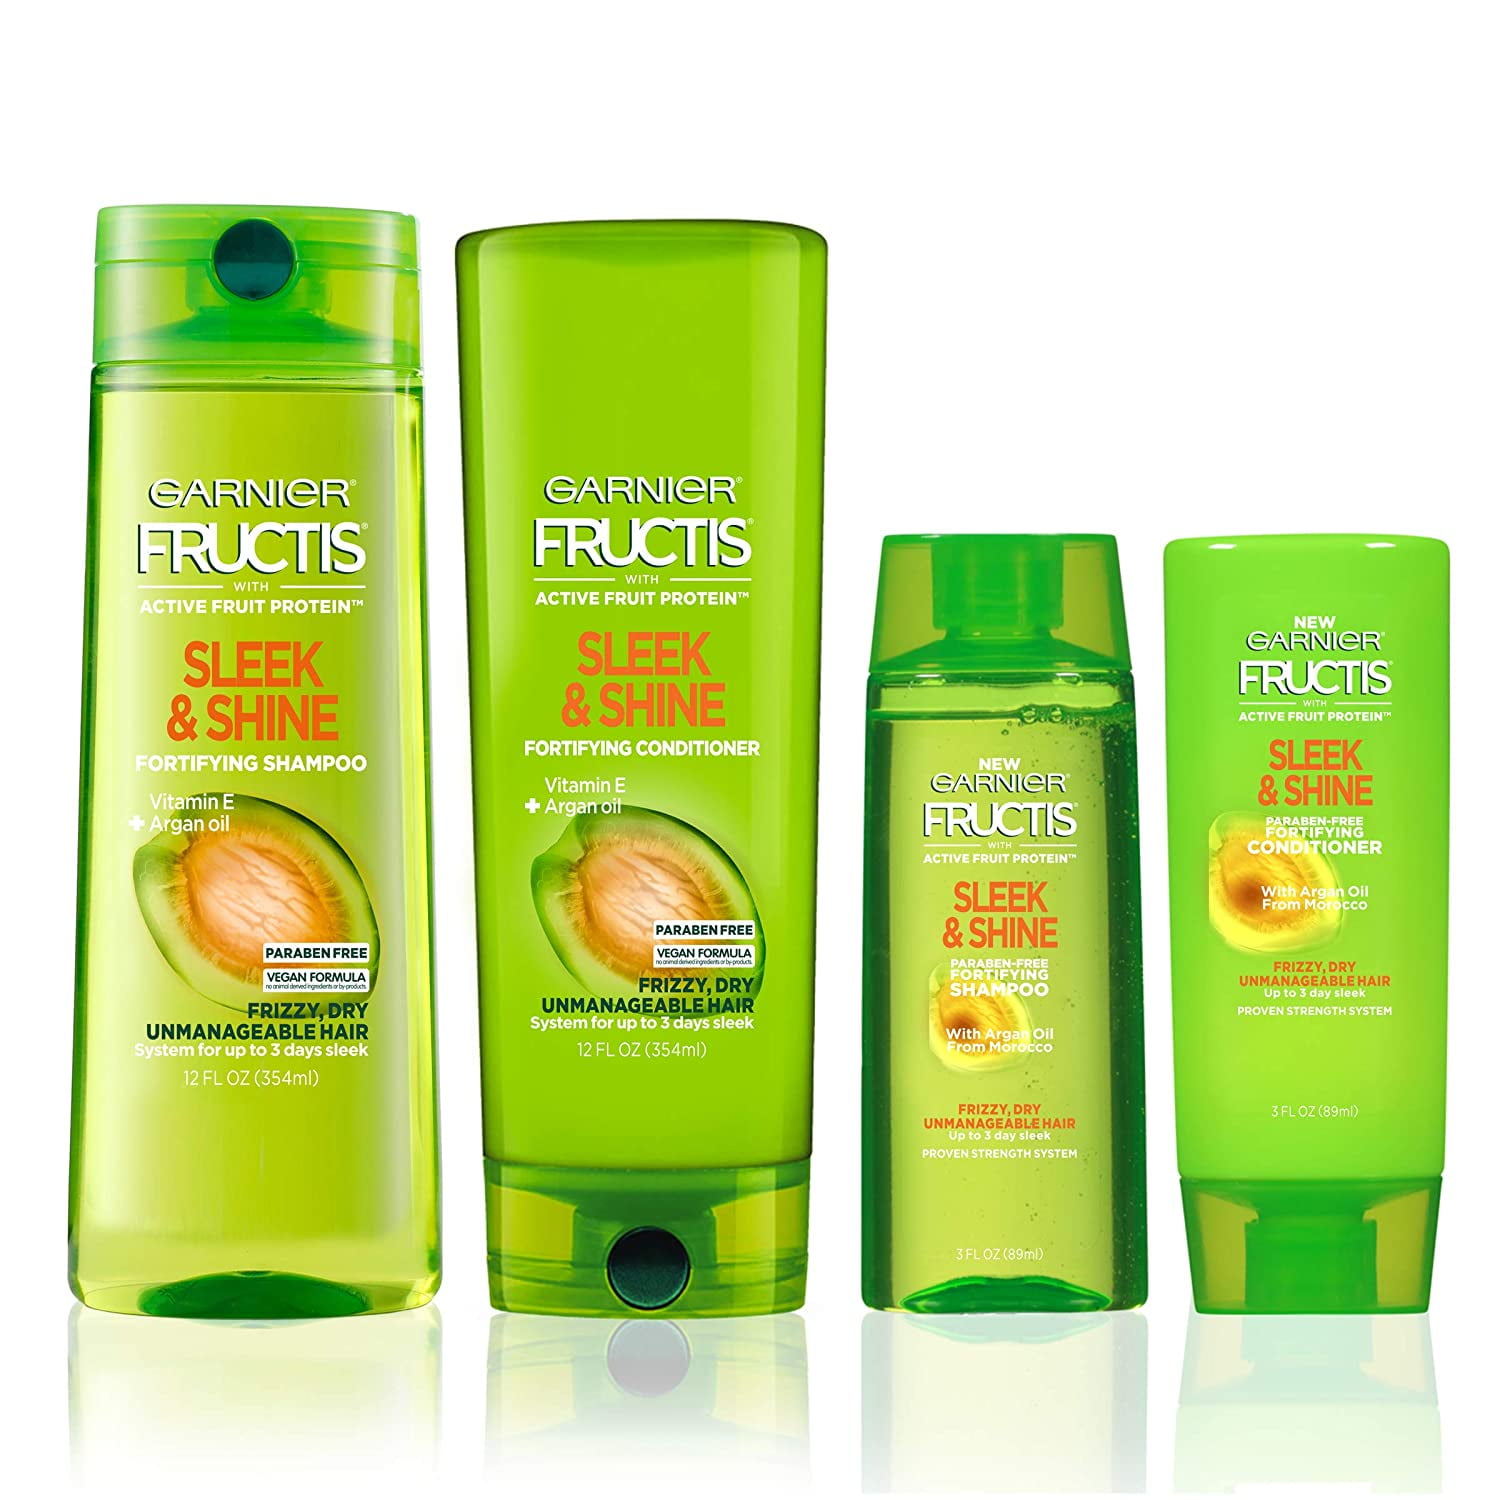 Hair Care Fructis Sleek & Shine Shampoo and Conditioner, For Frizzy, Dry  Hair, Made with Argan Oil from Morocco, Paraben Free Formula, 1 Kit with  Full Size and Travel Size 